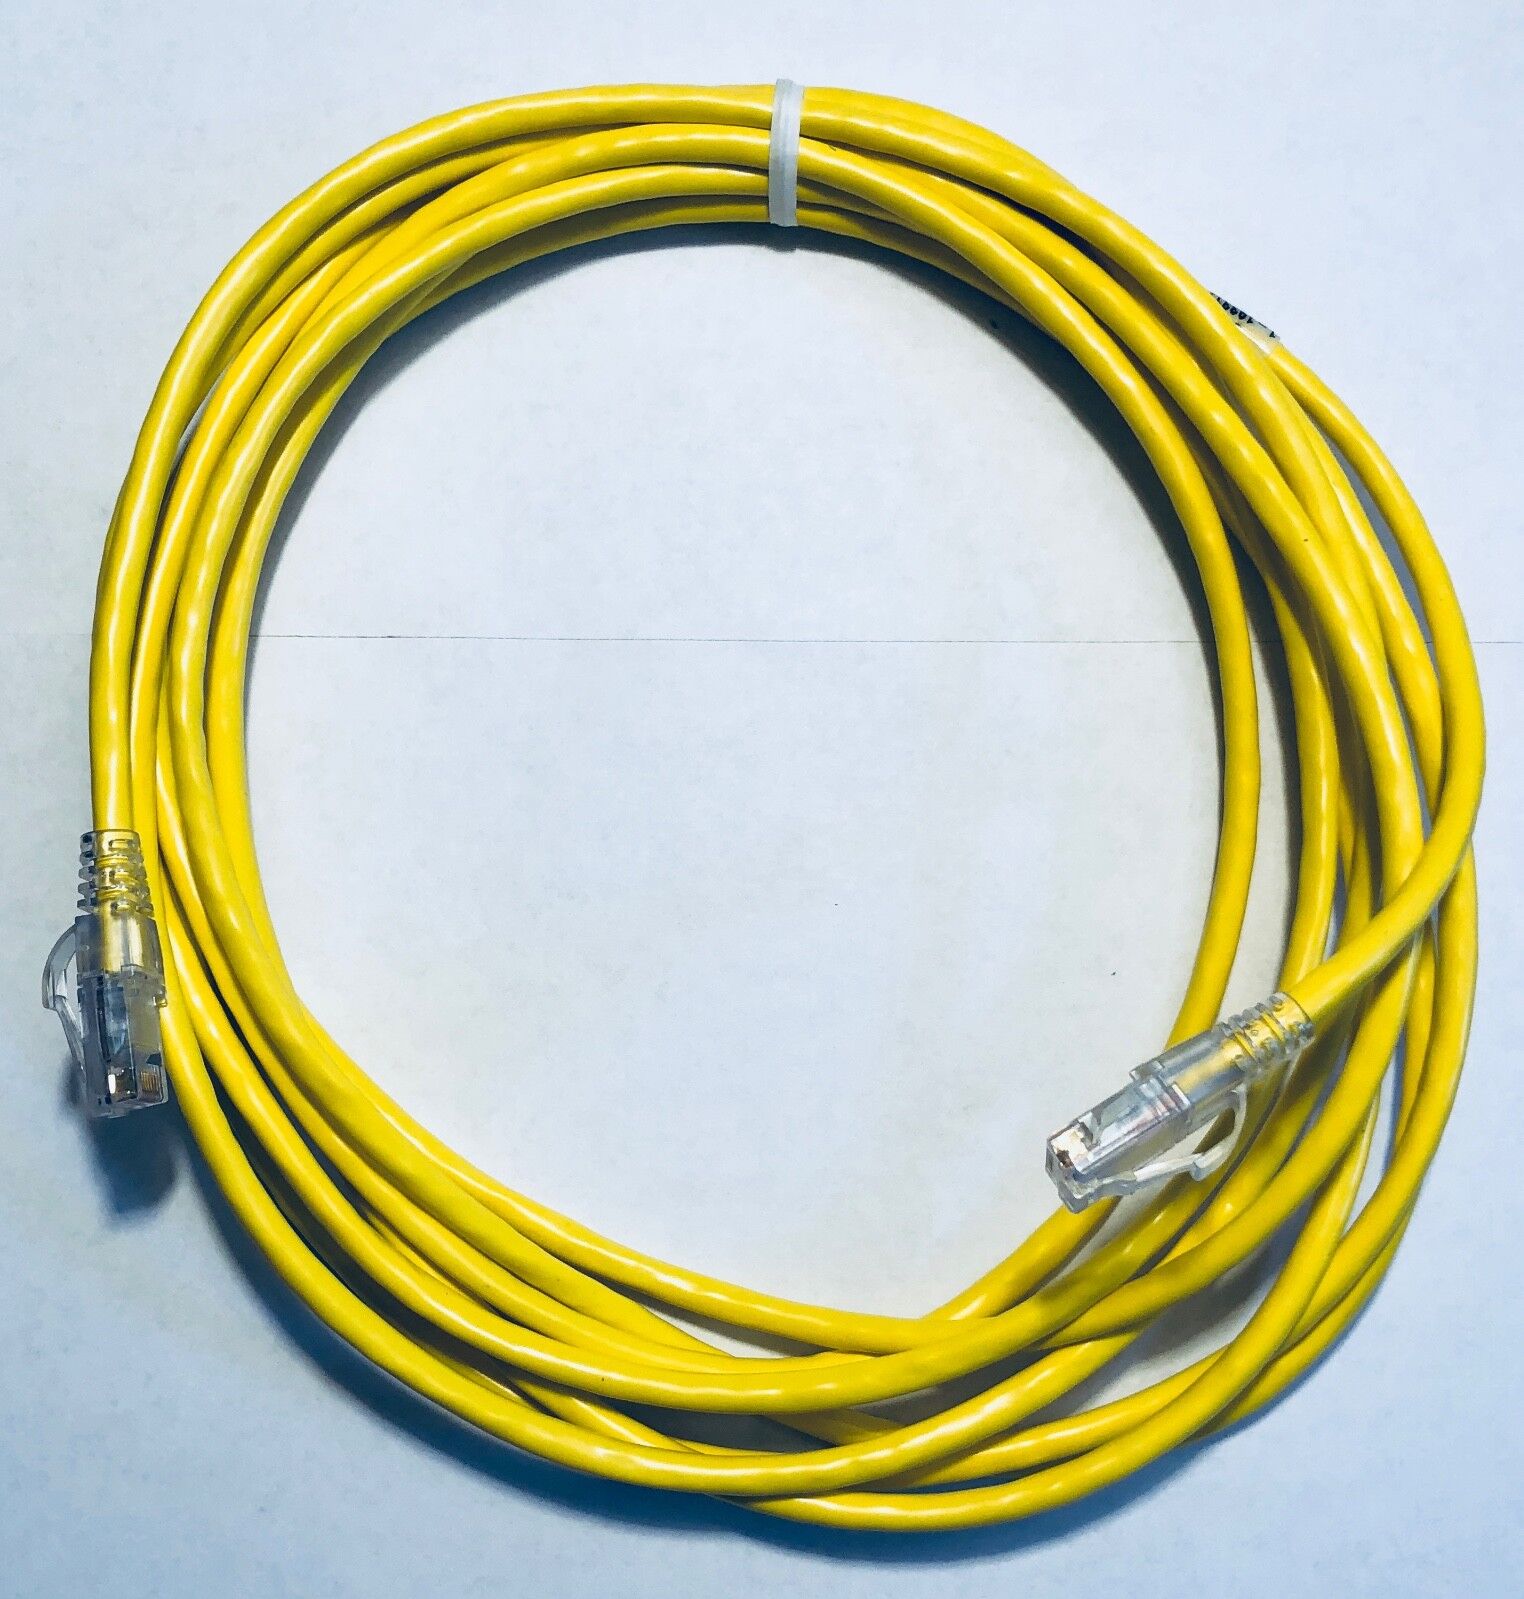 TE AMP CommScope 14ft CAT 6 Slimline Patch Cable Yellow